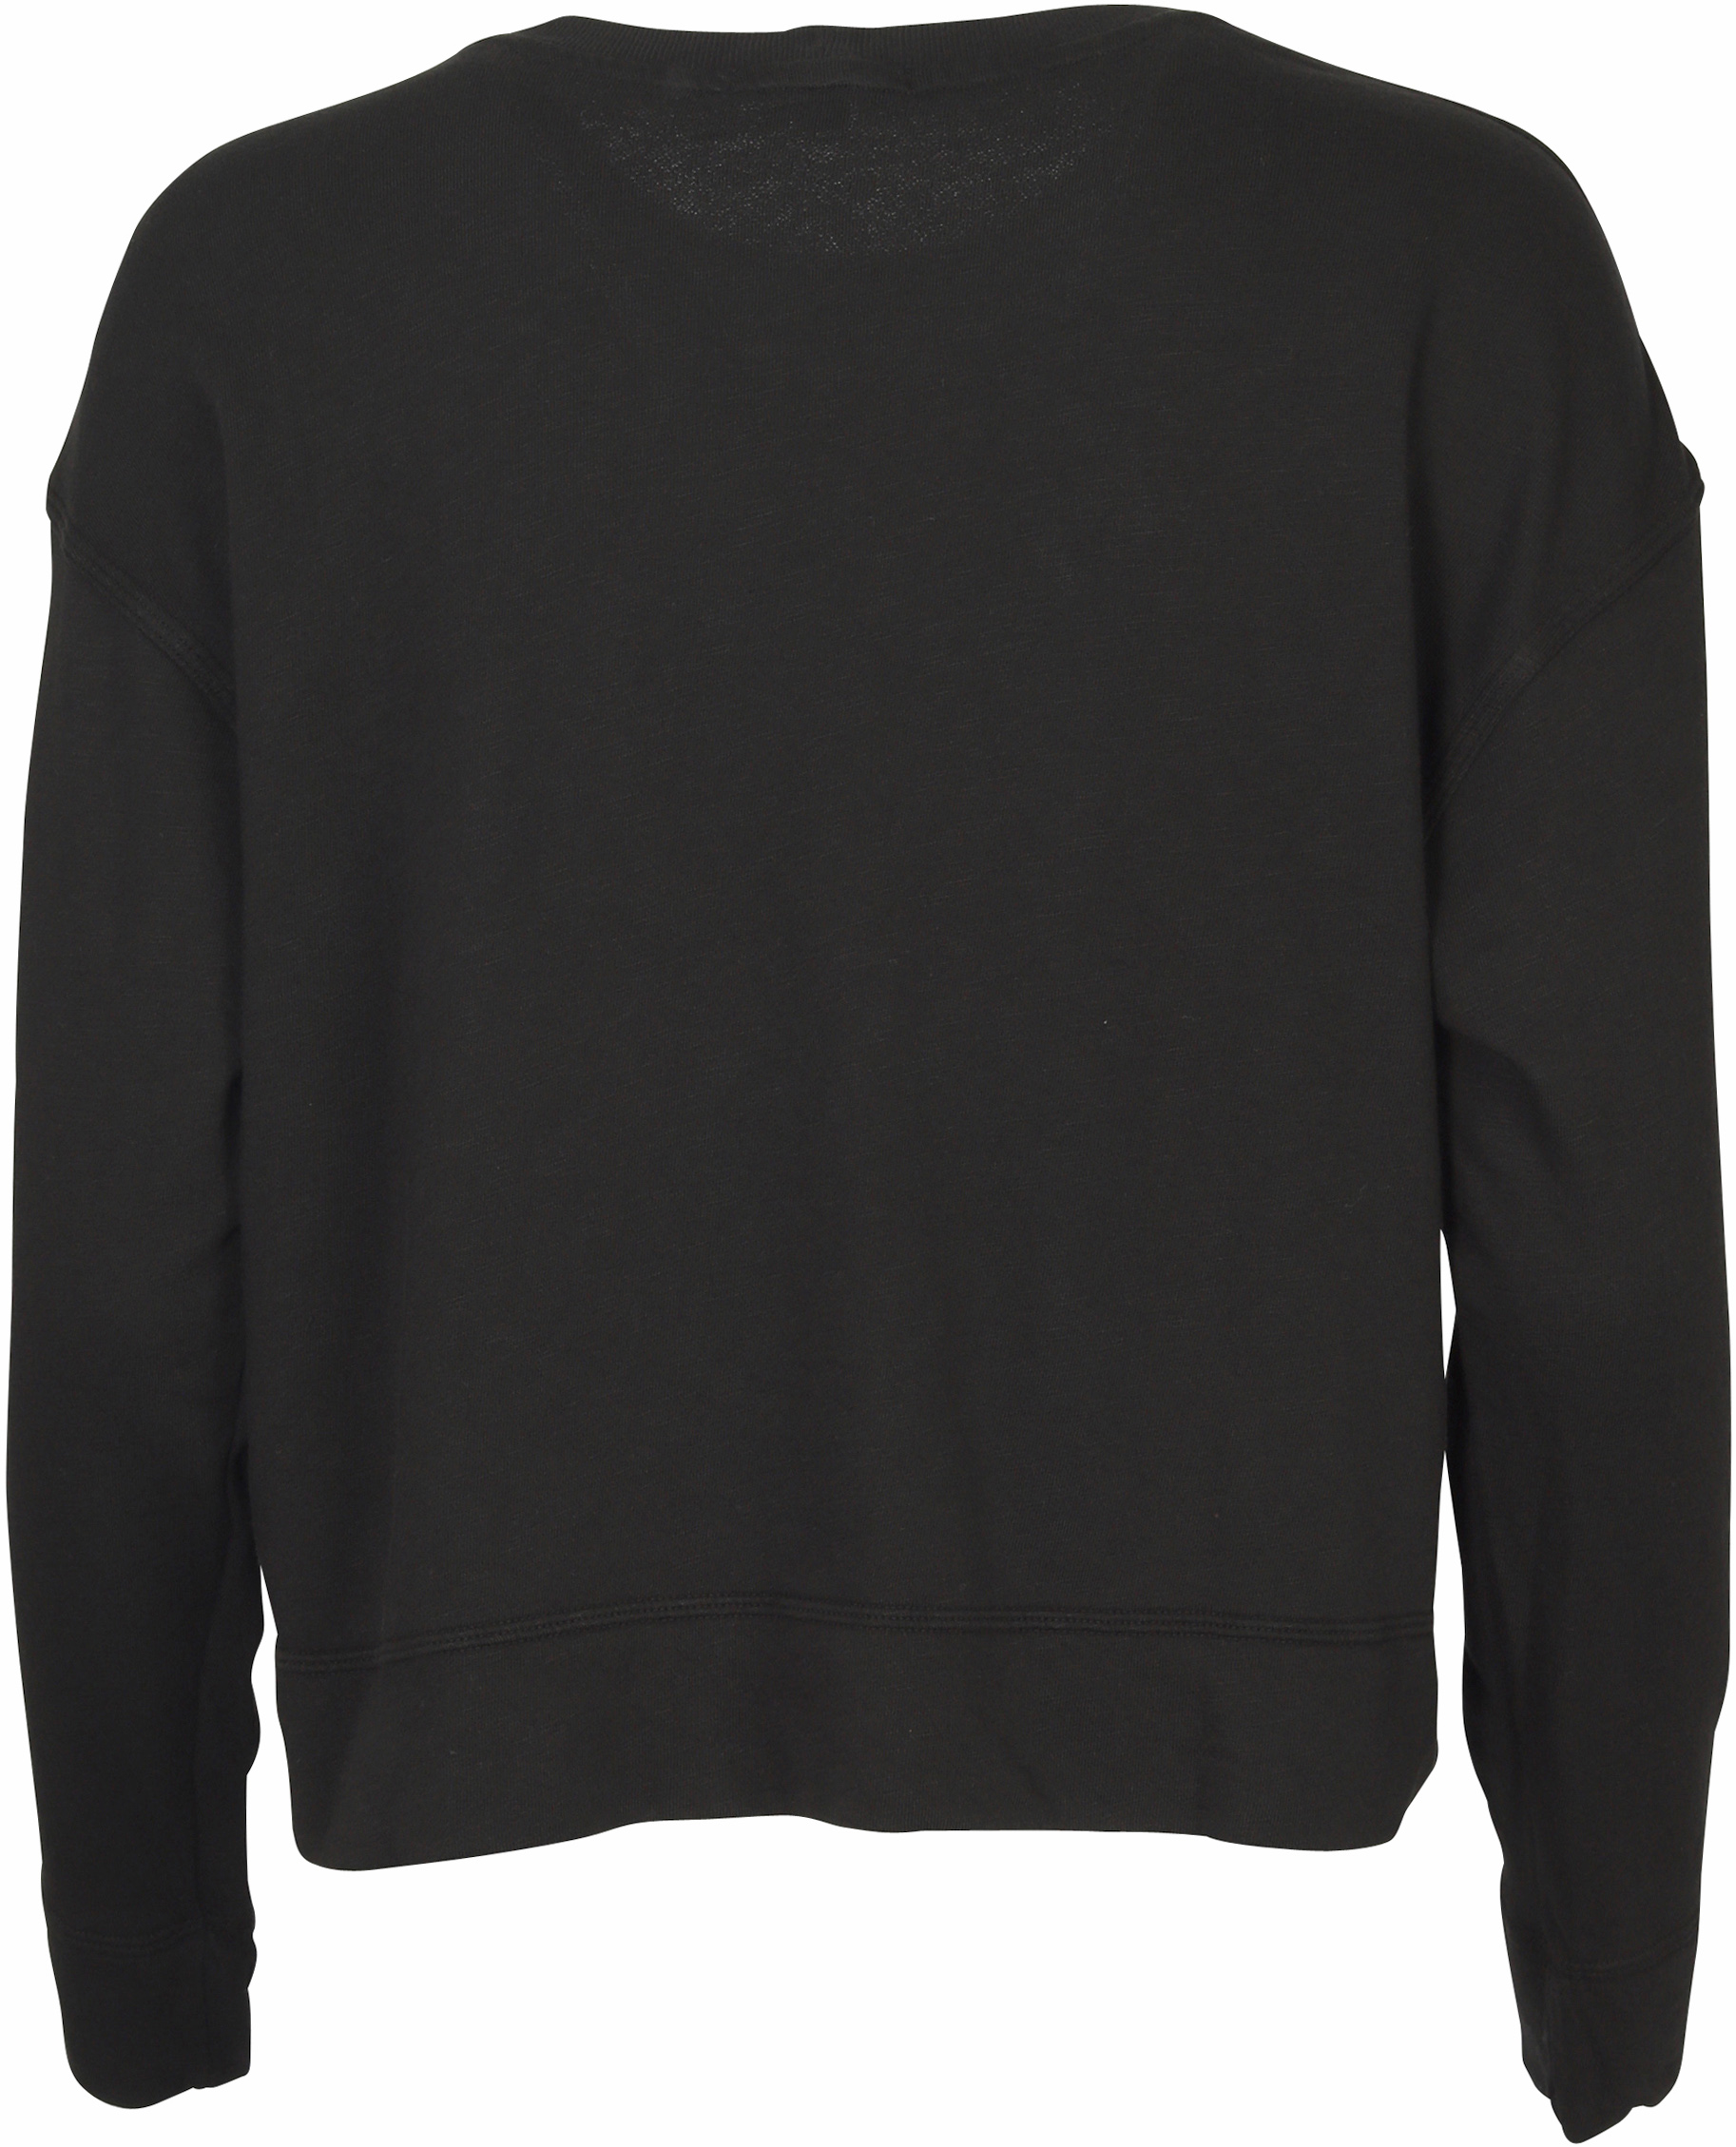 James Perse Relaxed Cropped Sweatshirt Black